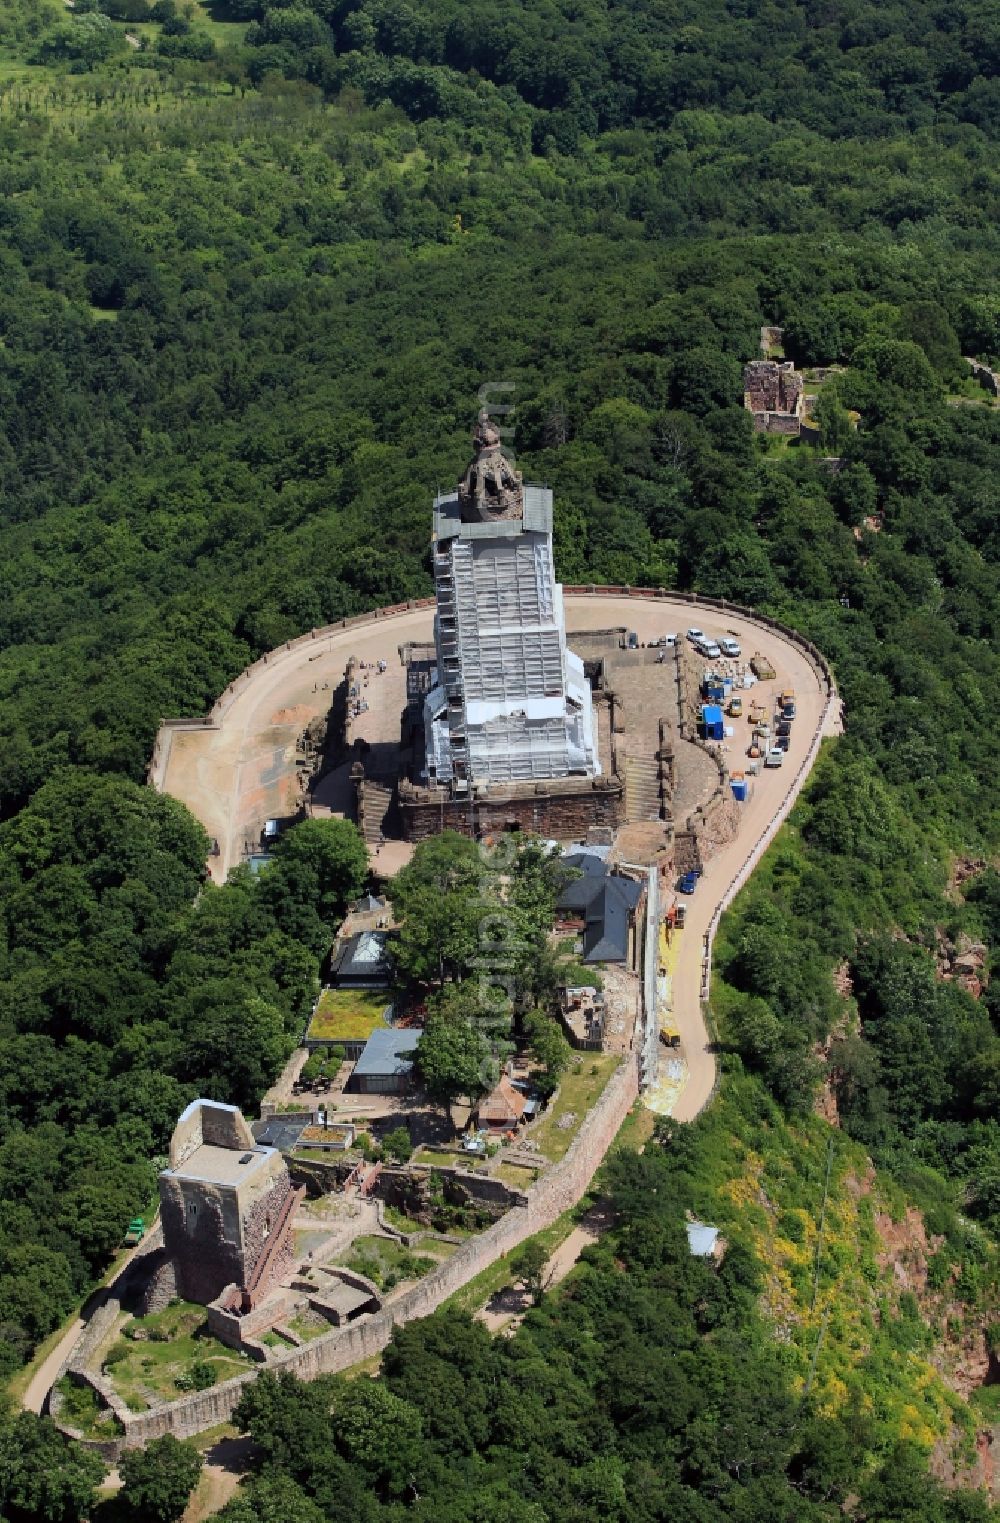 Aerial image Steinthaleben - Look at redevelopment of the monument Kyffhäuser near Steinthaleben in the state of Thuringia. The building with an equestrian statue was established by the architect Bruno Schmitz in honor of Kaiser Wilhelm I from 1890 to 1896. The monument, which was affcted by storm, is planed to be restored by the company Romstedt Technologies for Restorers GmbH until November 2013. The necessary scaffold is provided by the company Franke & Wagner GmbH